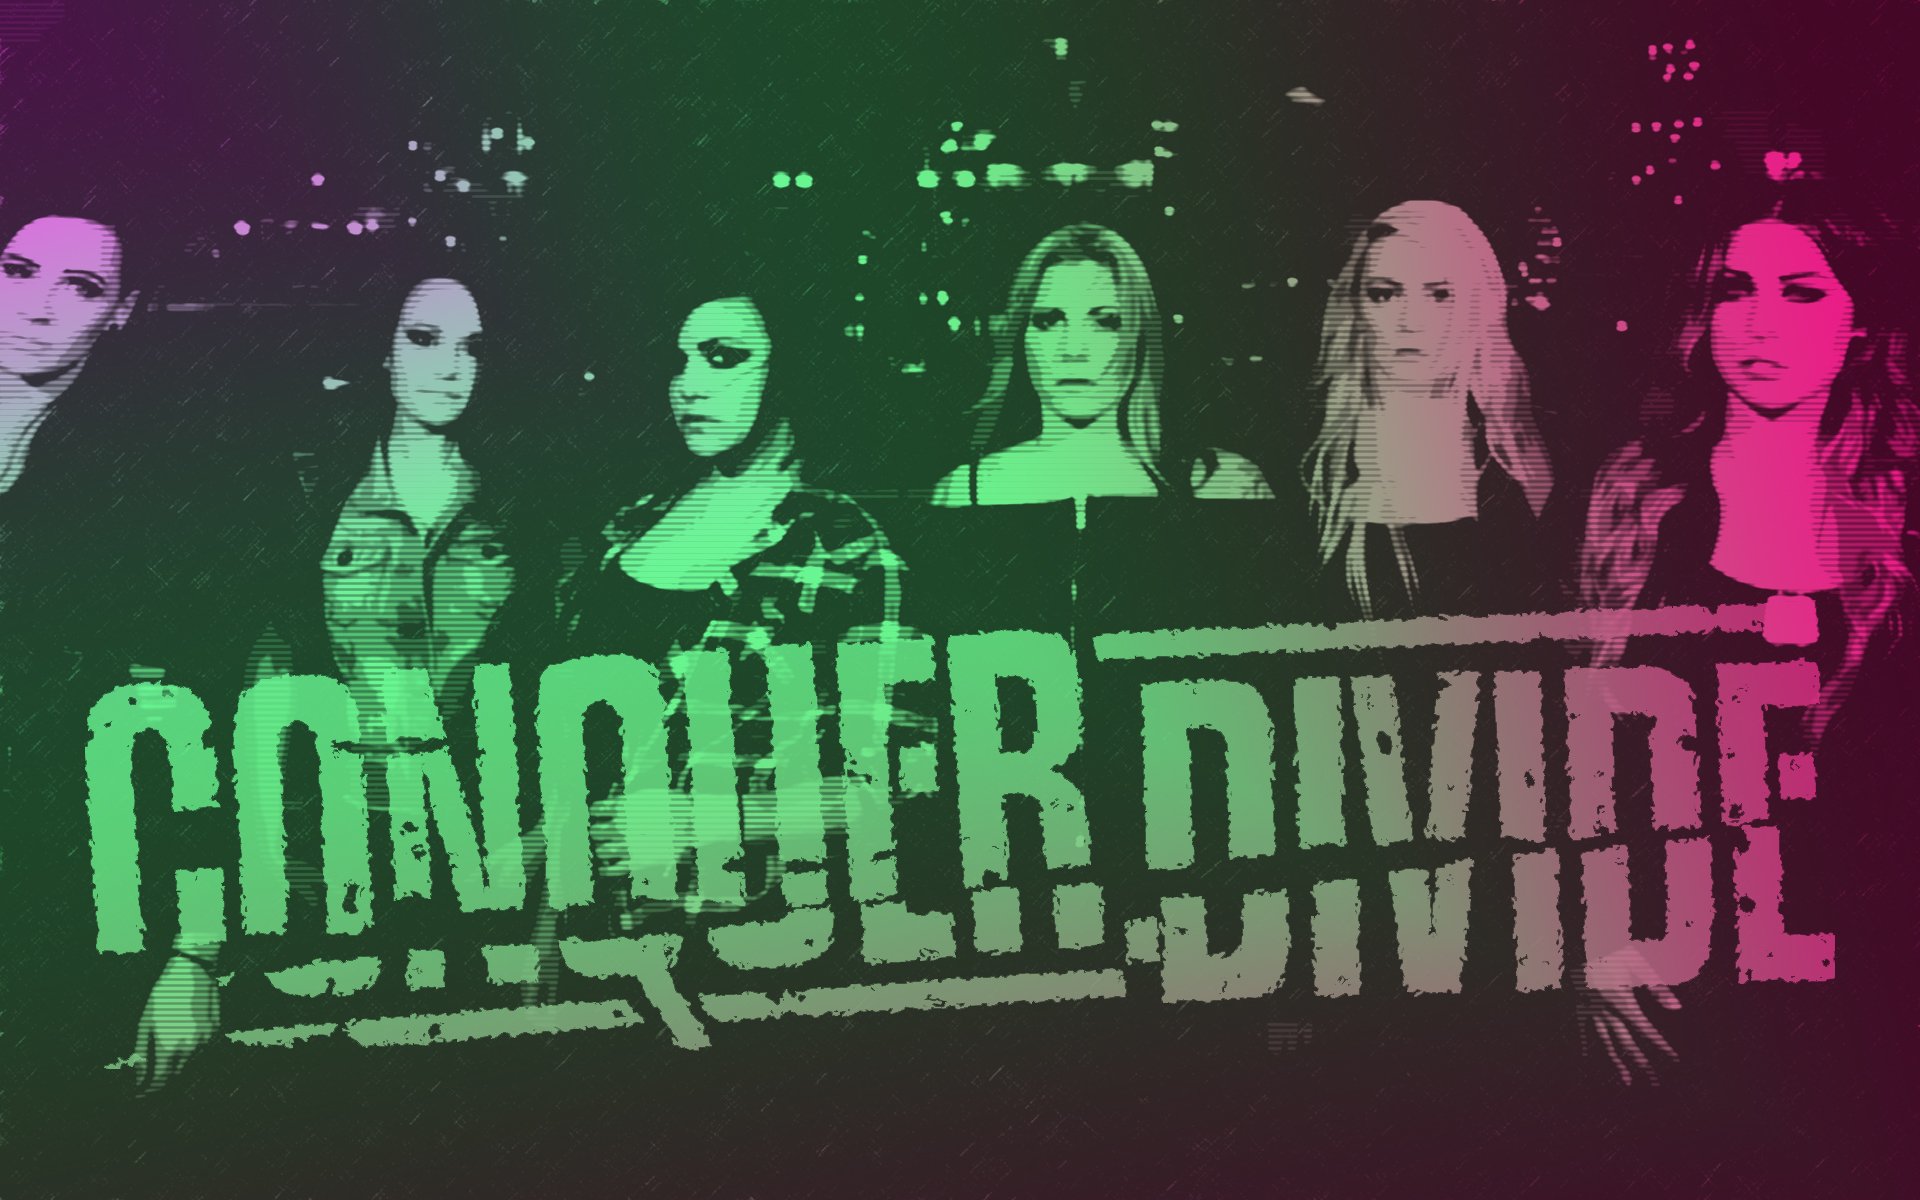 Conquer Divide Wallpapers